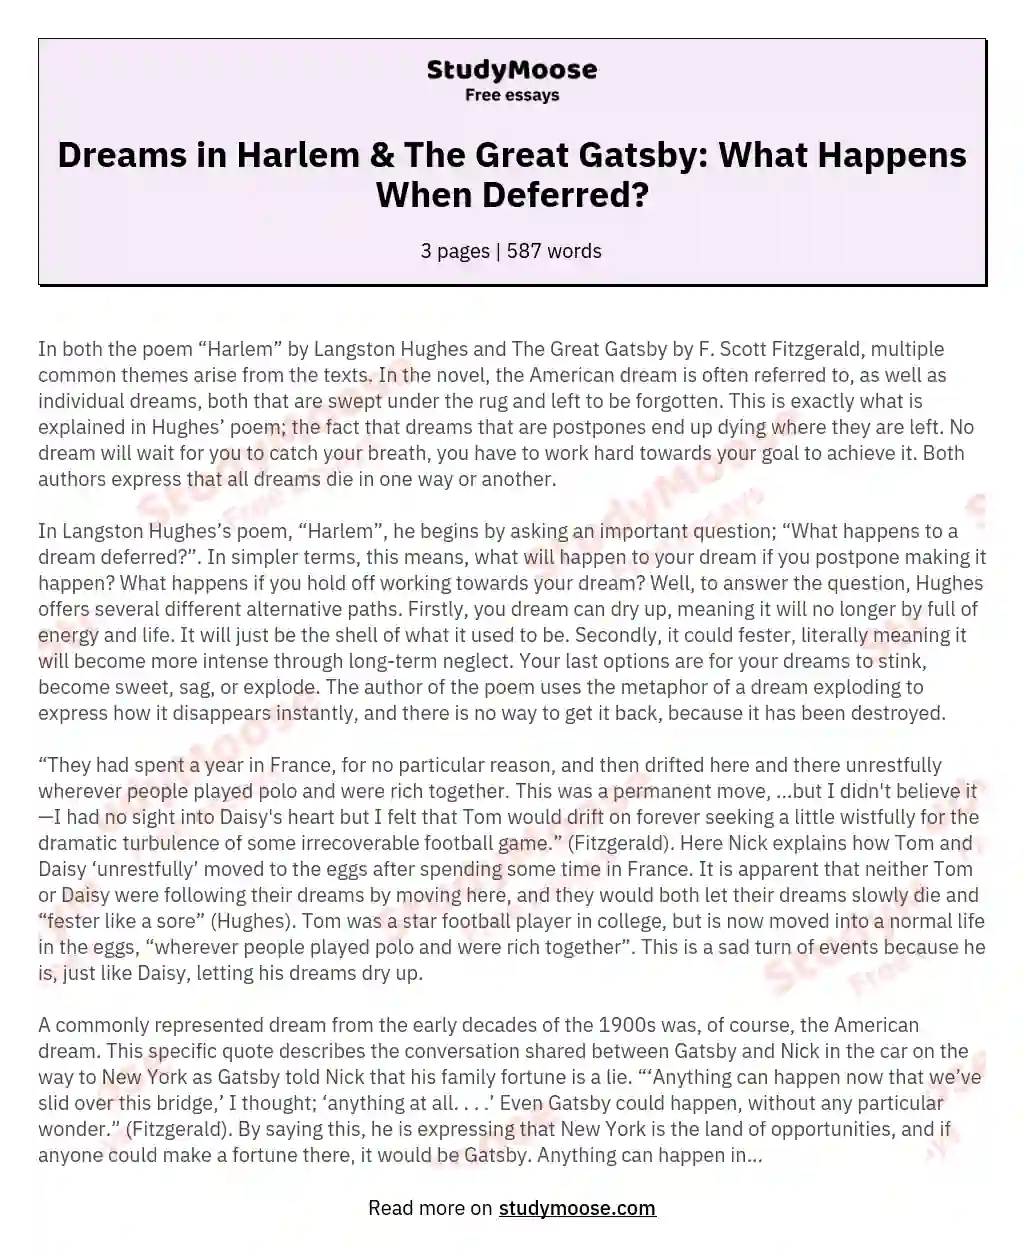 Dreams in Harlem & The Great Gatsby: What Happens When Deferred? essay